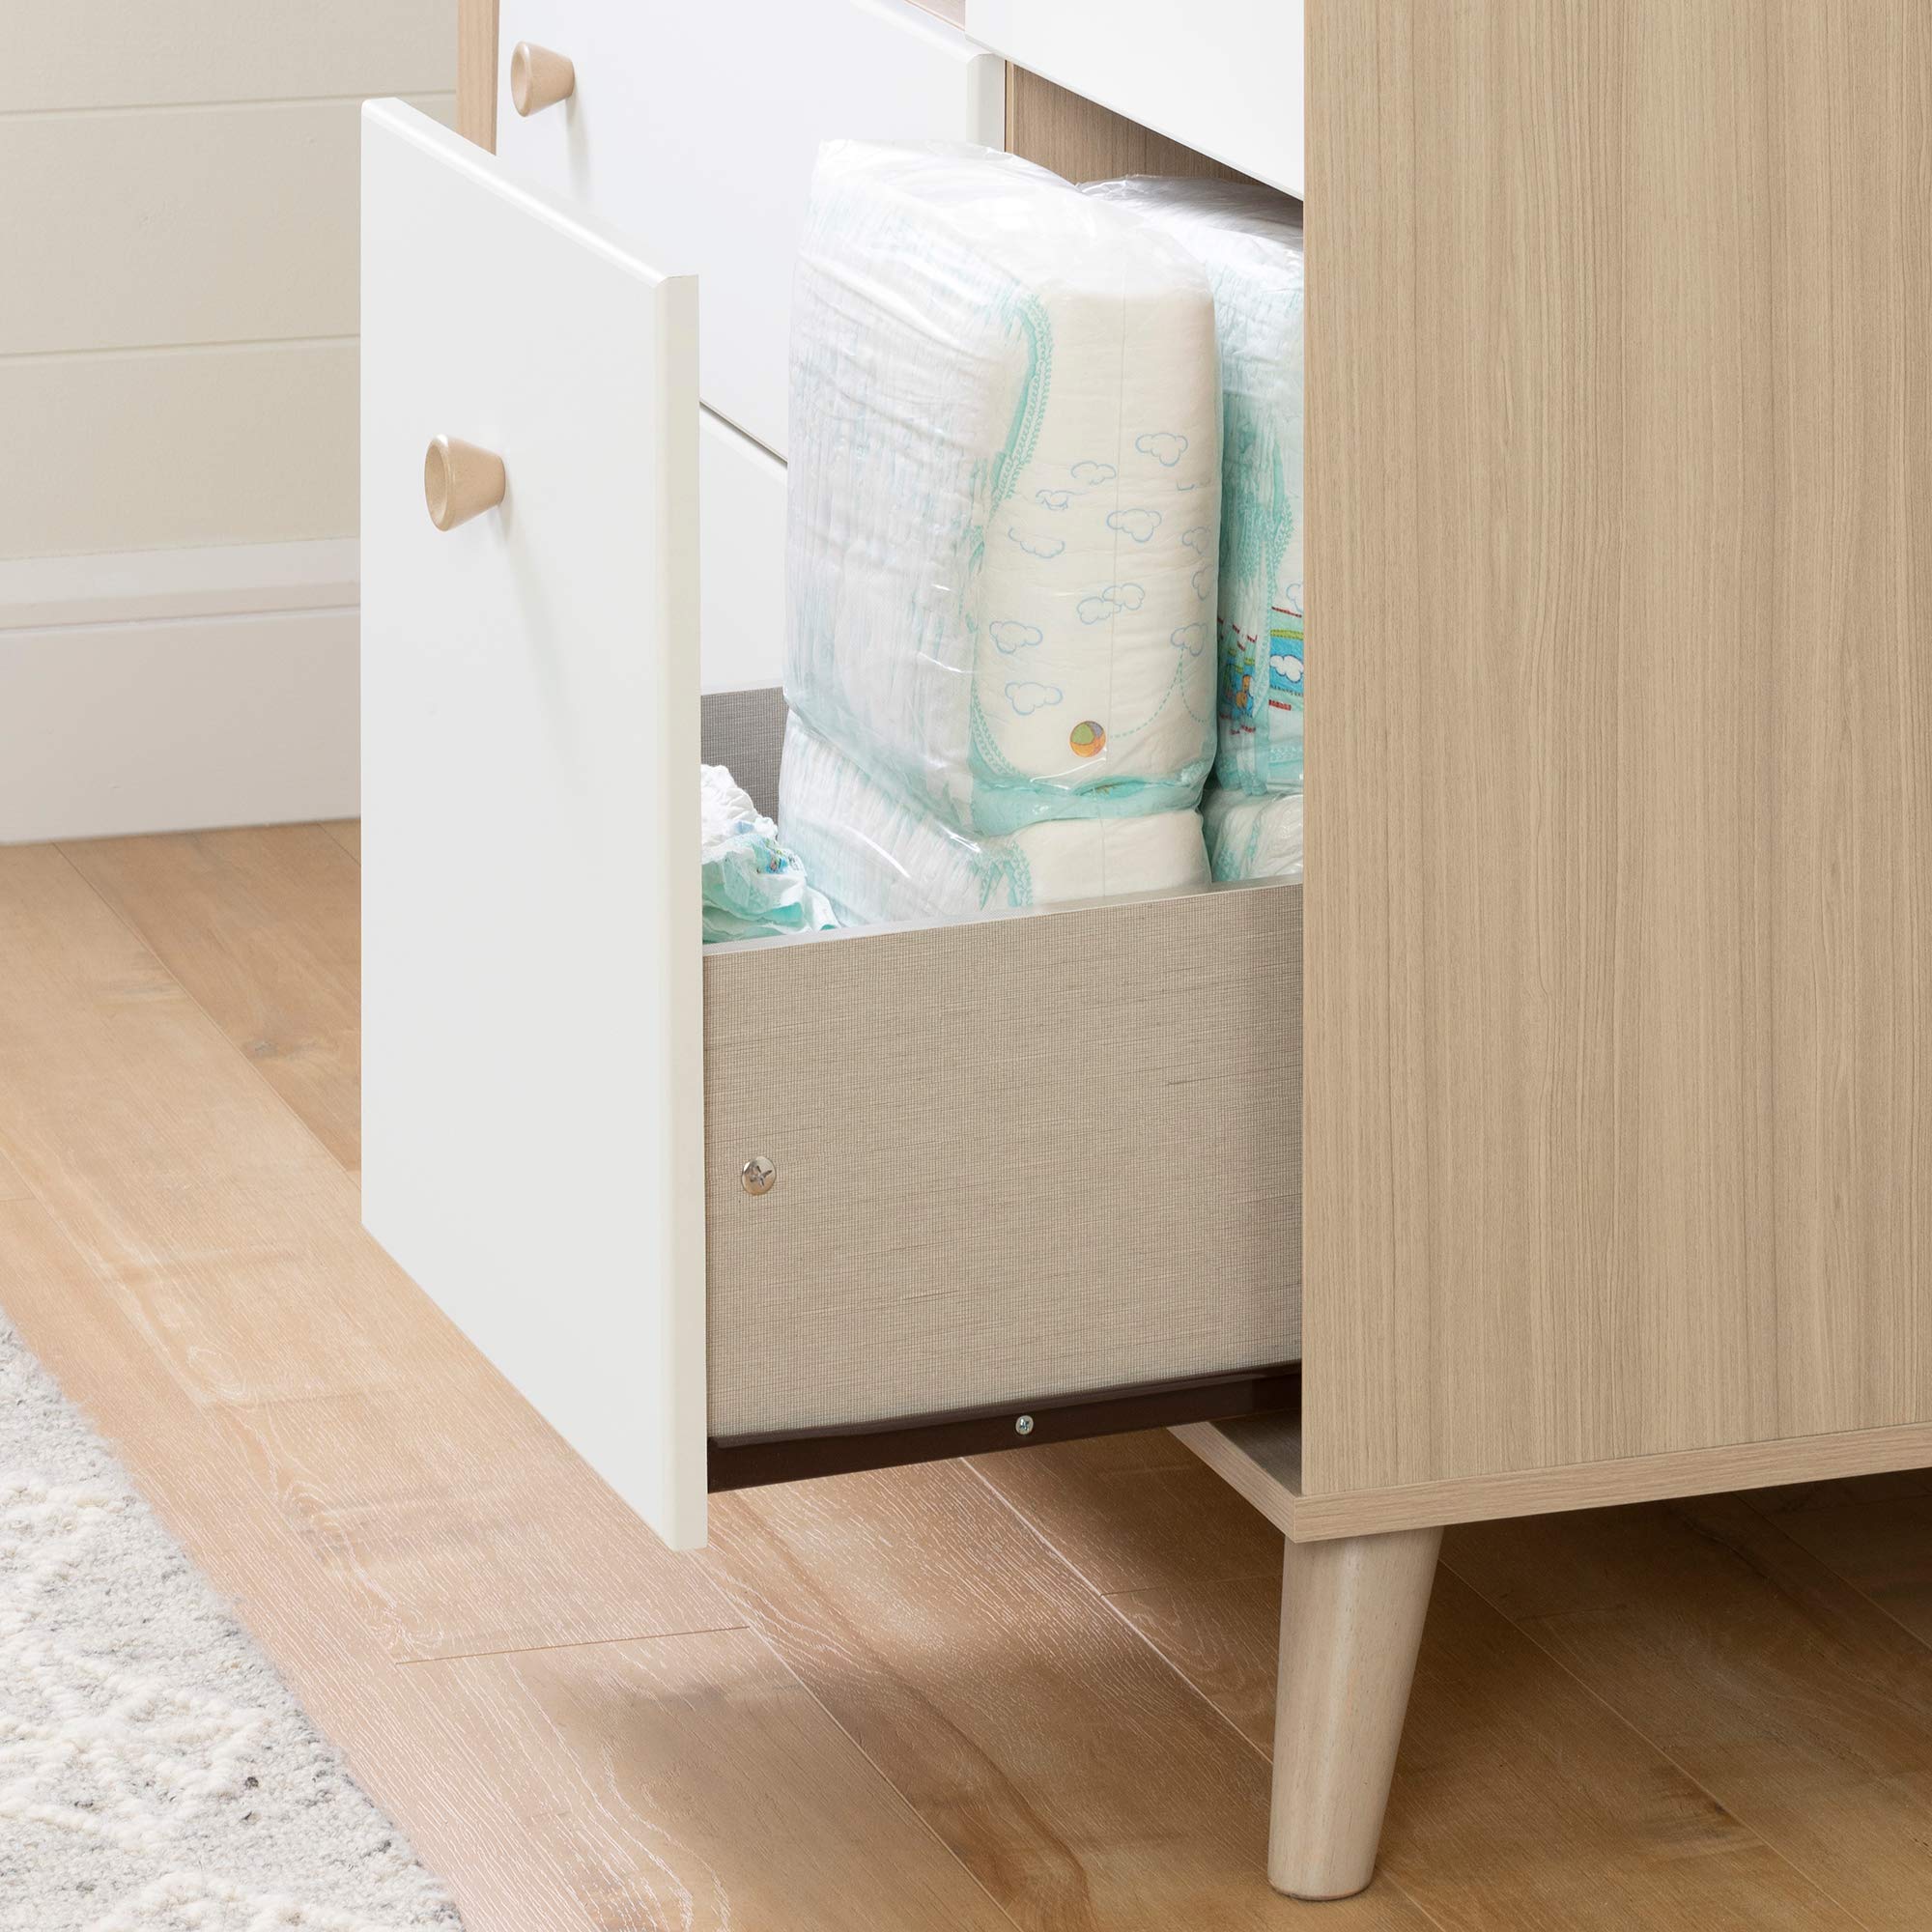 South Shore Yodi Changing Table with Drawers, Soft Elm and White